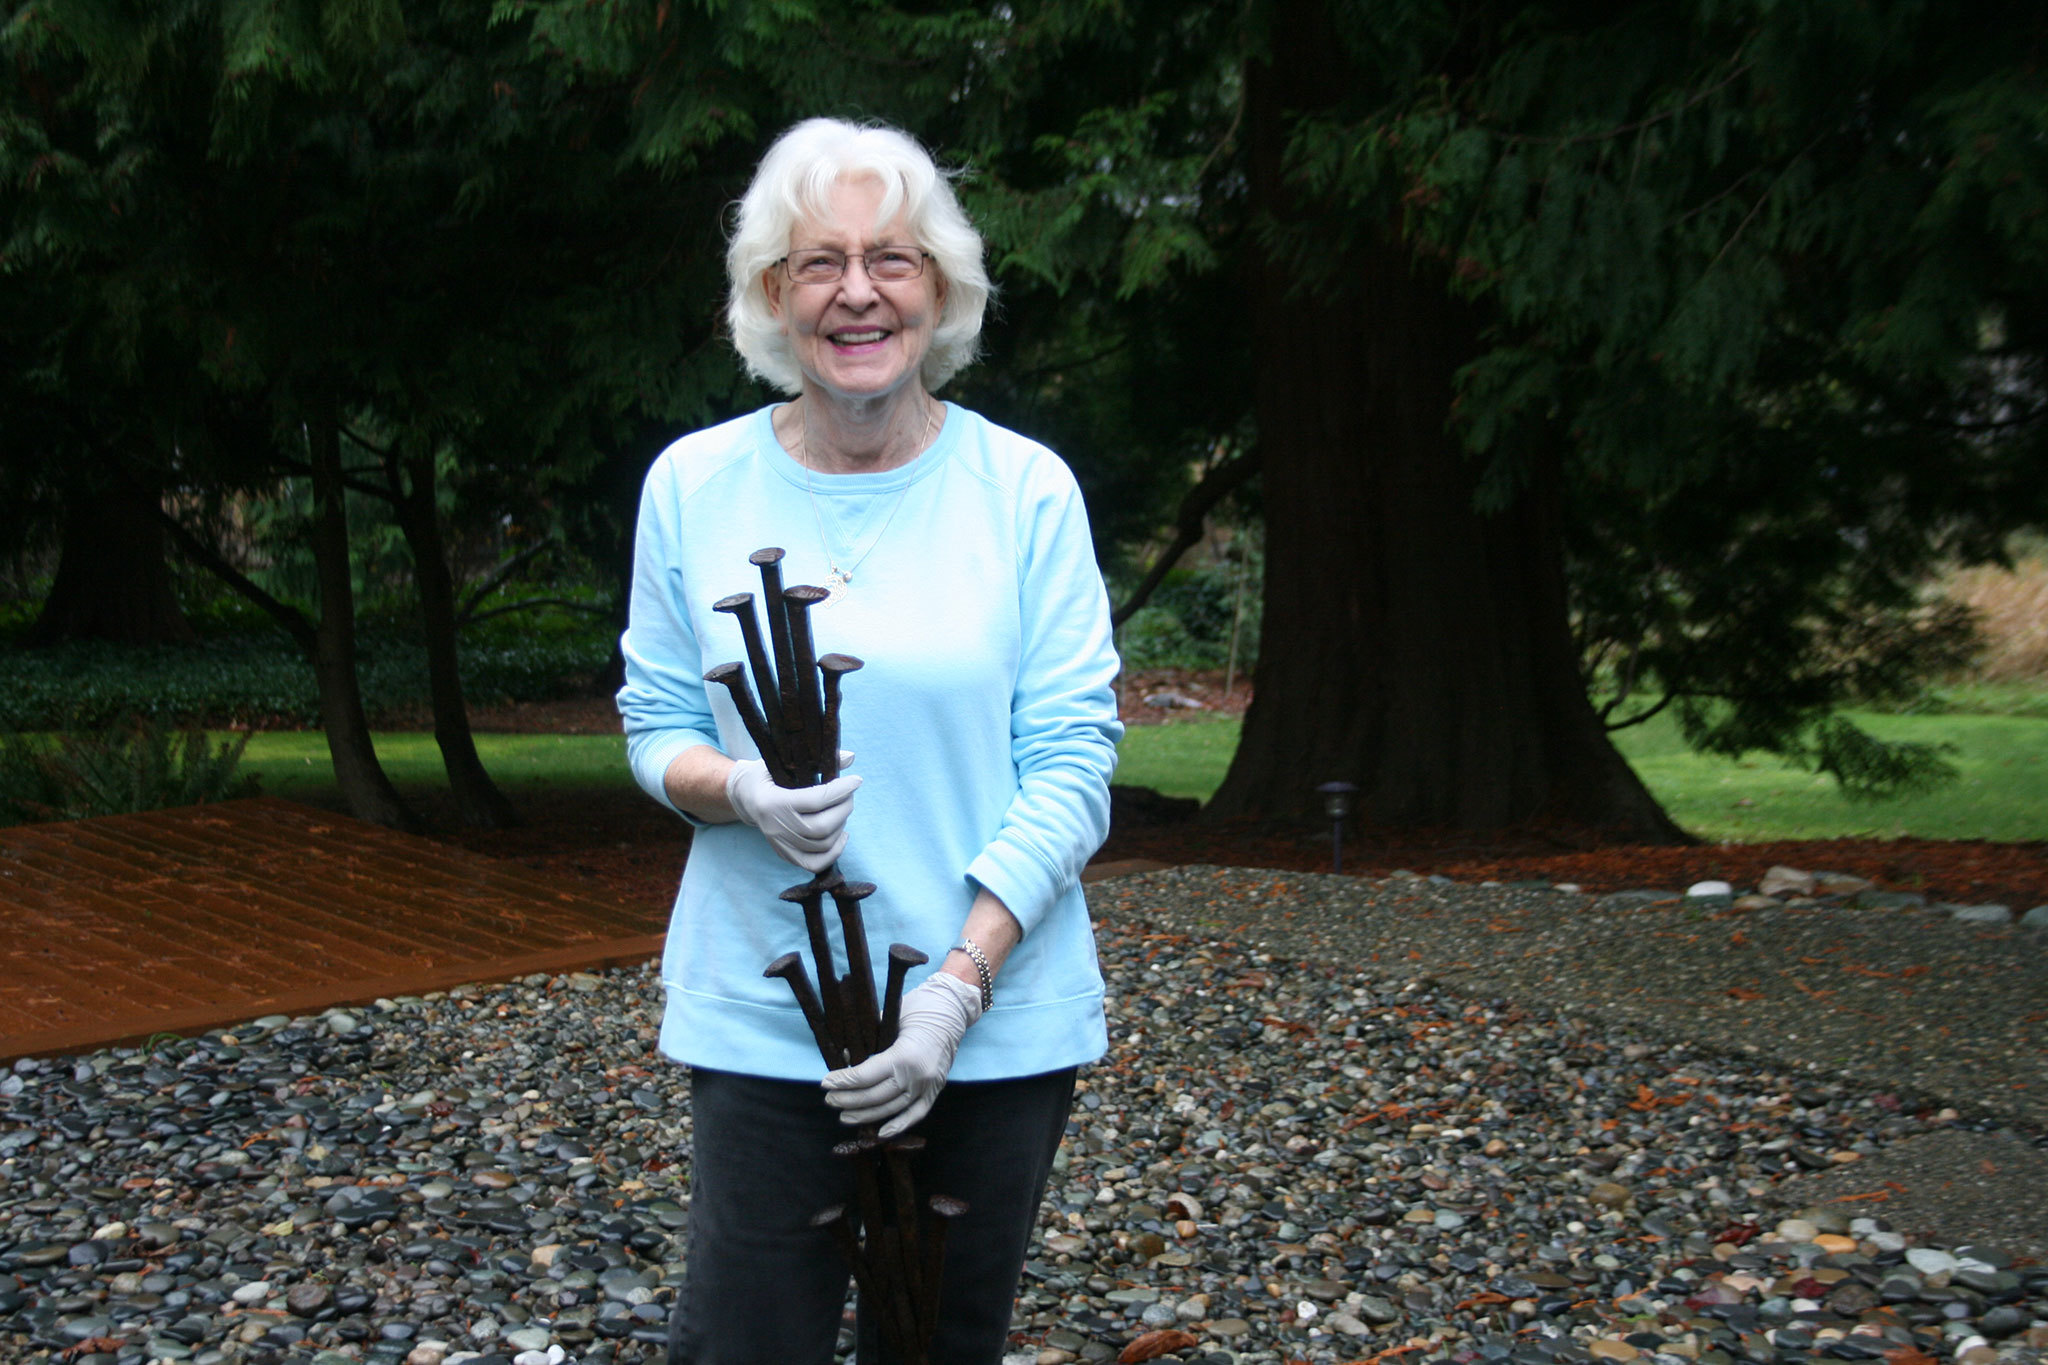 Merrily Dicks holds a sample of “The Spikes” sculpture that is displayed in her Kirkland backyard. One of her assistants, Yancy McCoy, helped create this piece. The full sculpture has been installed on the Cross Kirkland Corridor. CATHERINE KRUMMEY / Kirkland Reporter